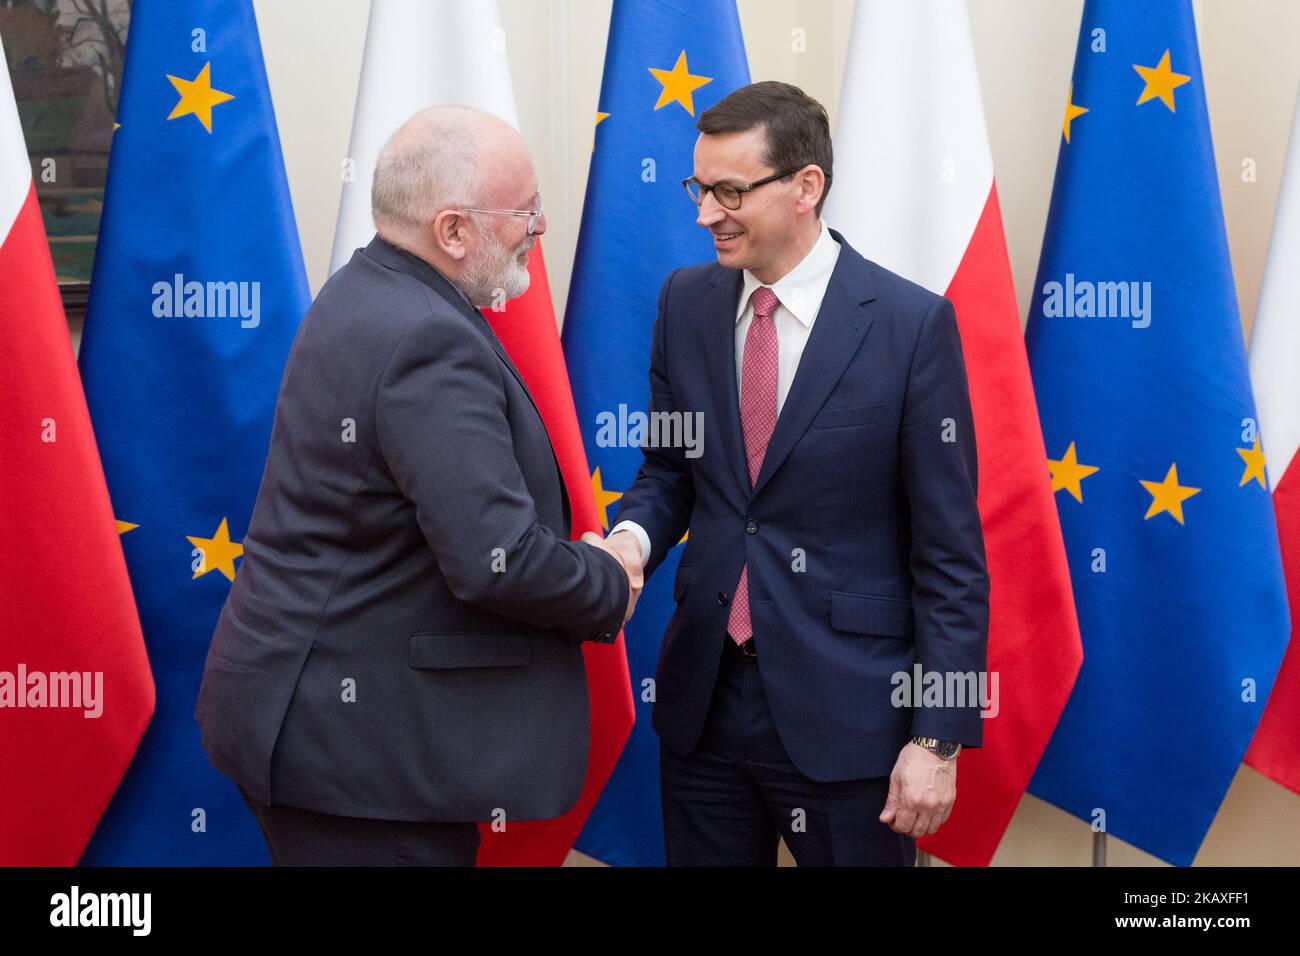 Vice-President of the European Commission Frans Timmermans (L) during the meeting with Prime Minister of Poland Mateusz Morawiecki (R) at Chancellery of the Prime Minister in Warsaw, Poland on 9 April 2018 (Photo by Mateusz Wlodarczyk/NurPhoto) Stock Photo